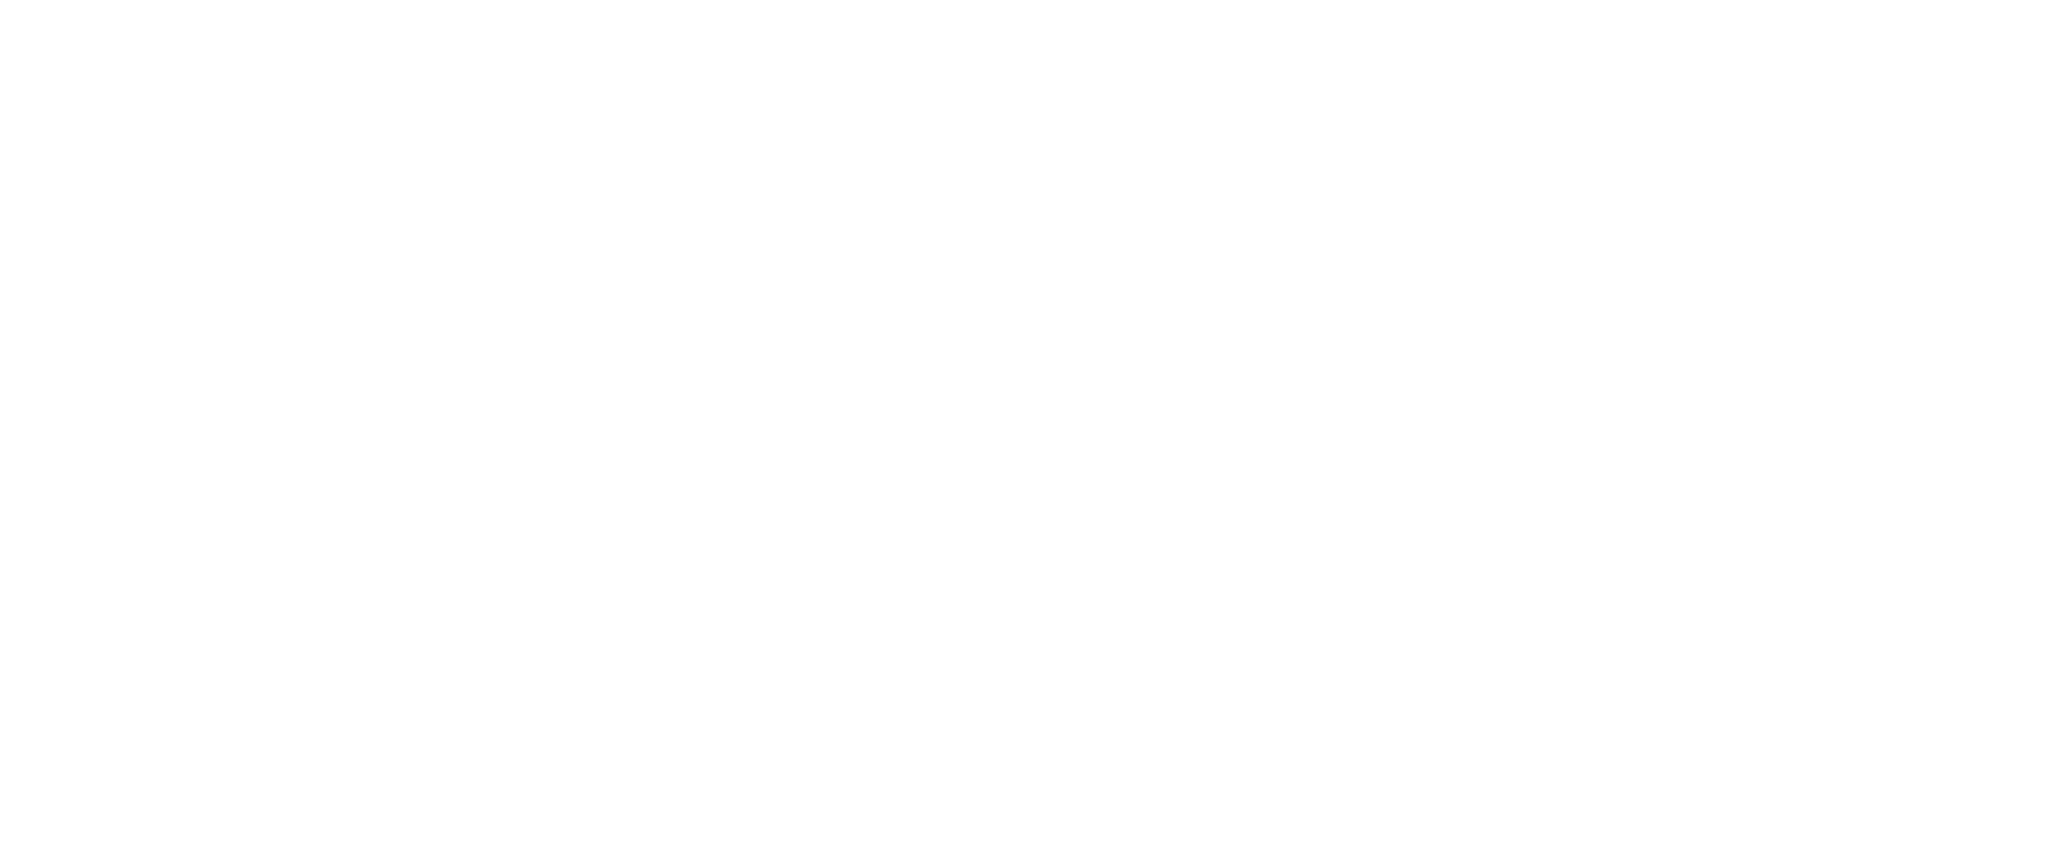 Natural Tonic, Oil Finished Ash Body – Hayley Guitars